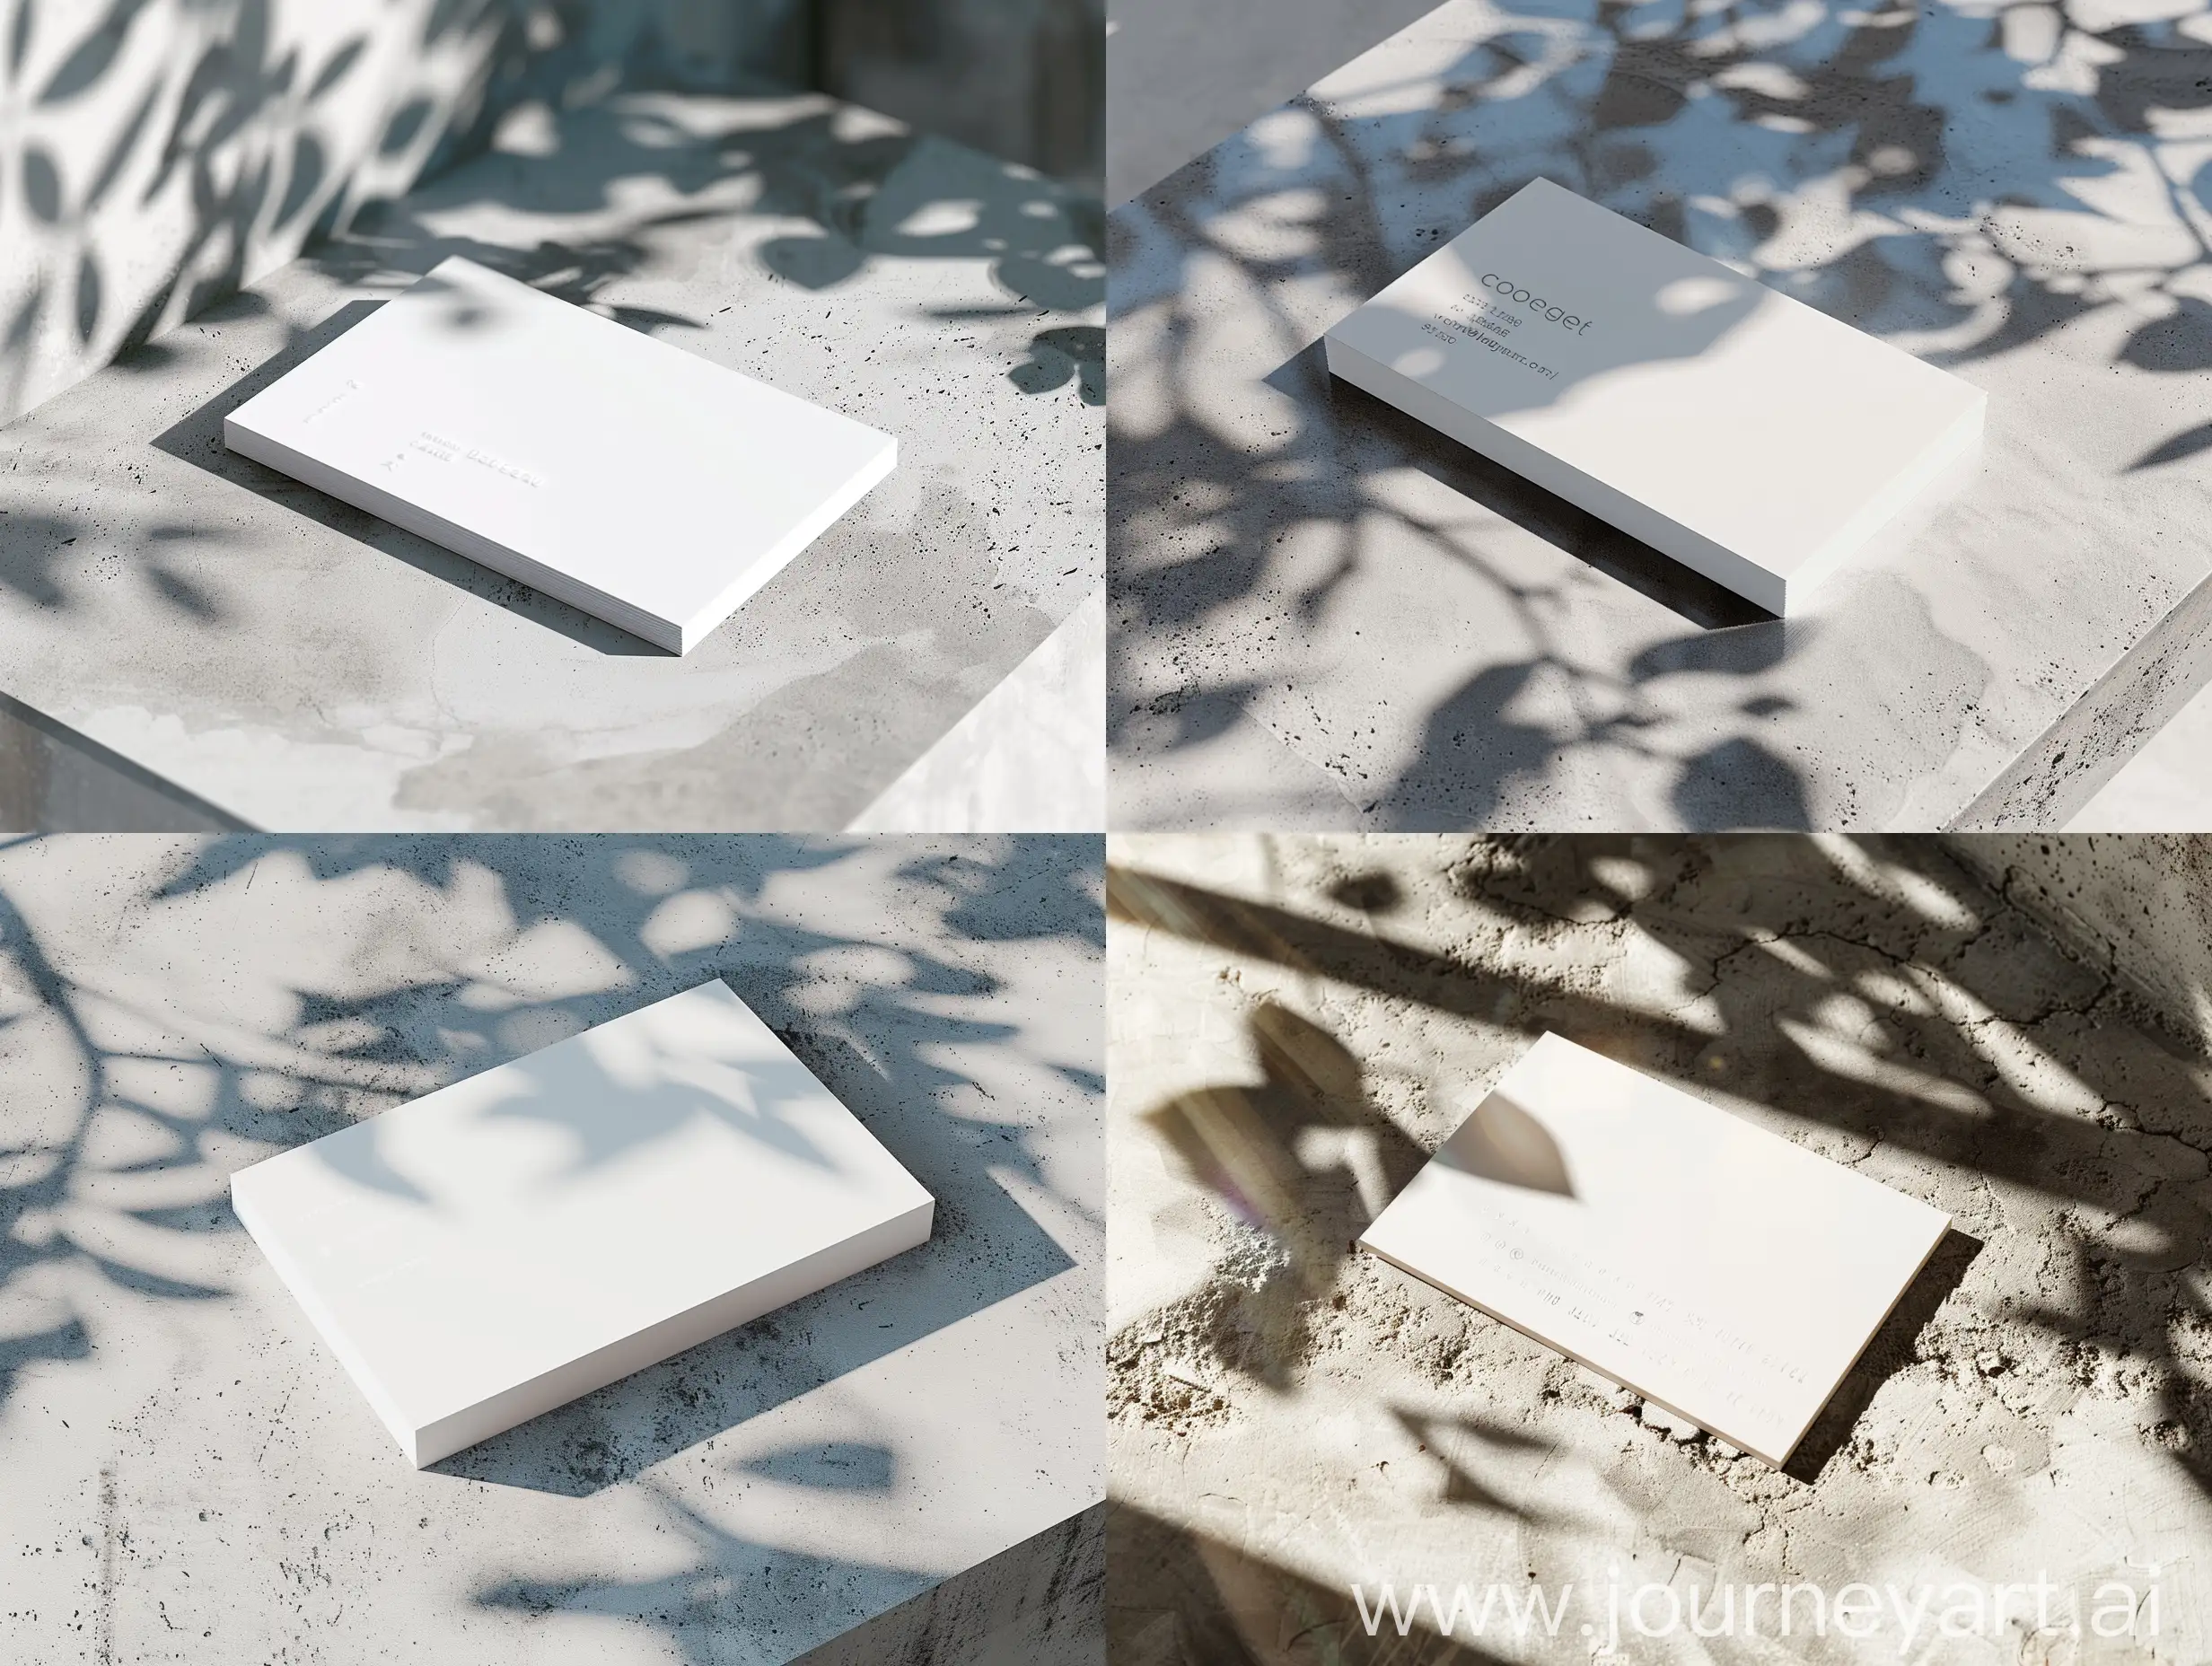 White-Business-Card-on-Concrete-in-Sunlight